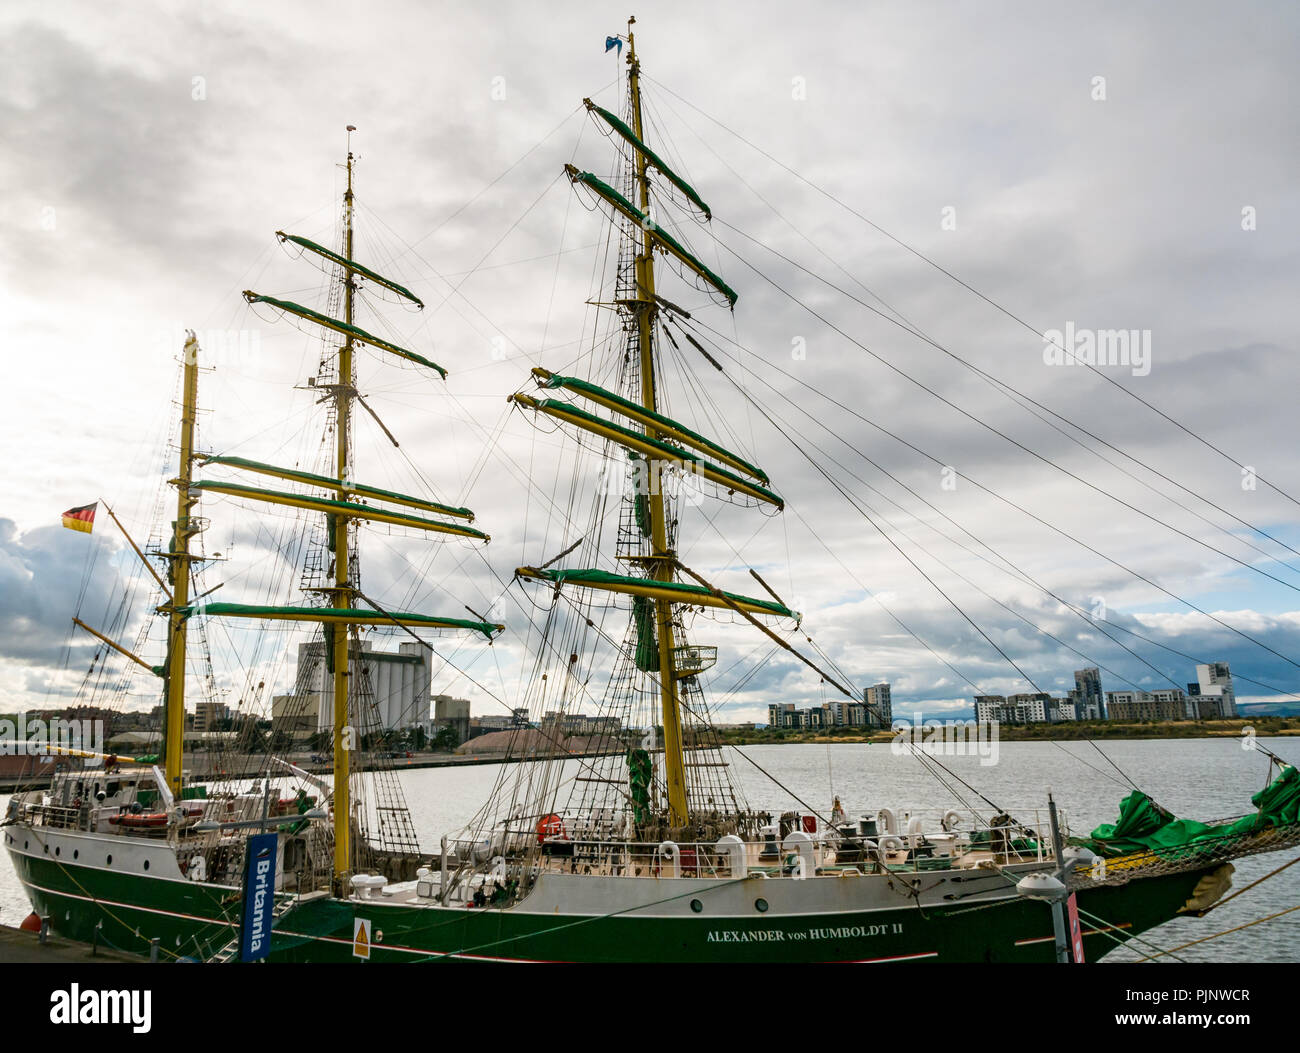 Leith dock, Leith, Edinburgh, Scotland, UK. 8th Sep, 2018. Alexander von Humboldt II tall ship visits Leith harbour and is moored in the Entrance Basin. The ship, built in 2011, is a civilian square rigger tall ship offering voyages for young people aged 15-25, and is operated by Deutsche Stiftung Sail Training (German Sail Training Foundation/DSST). It competes in tall ship races Stock Photo